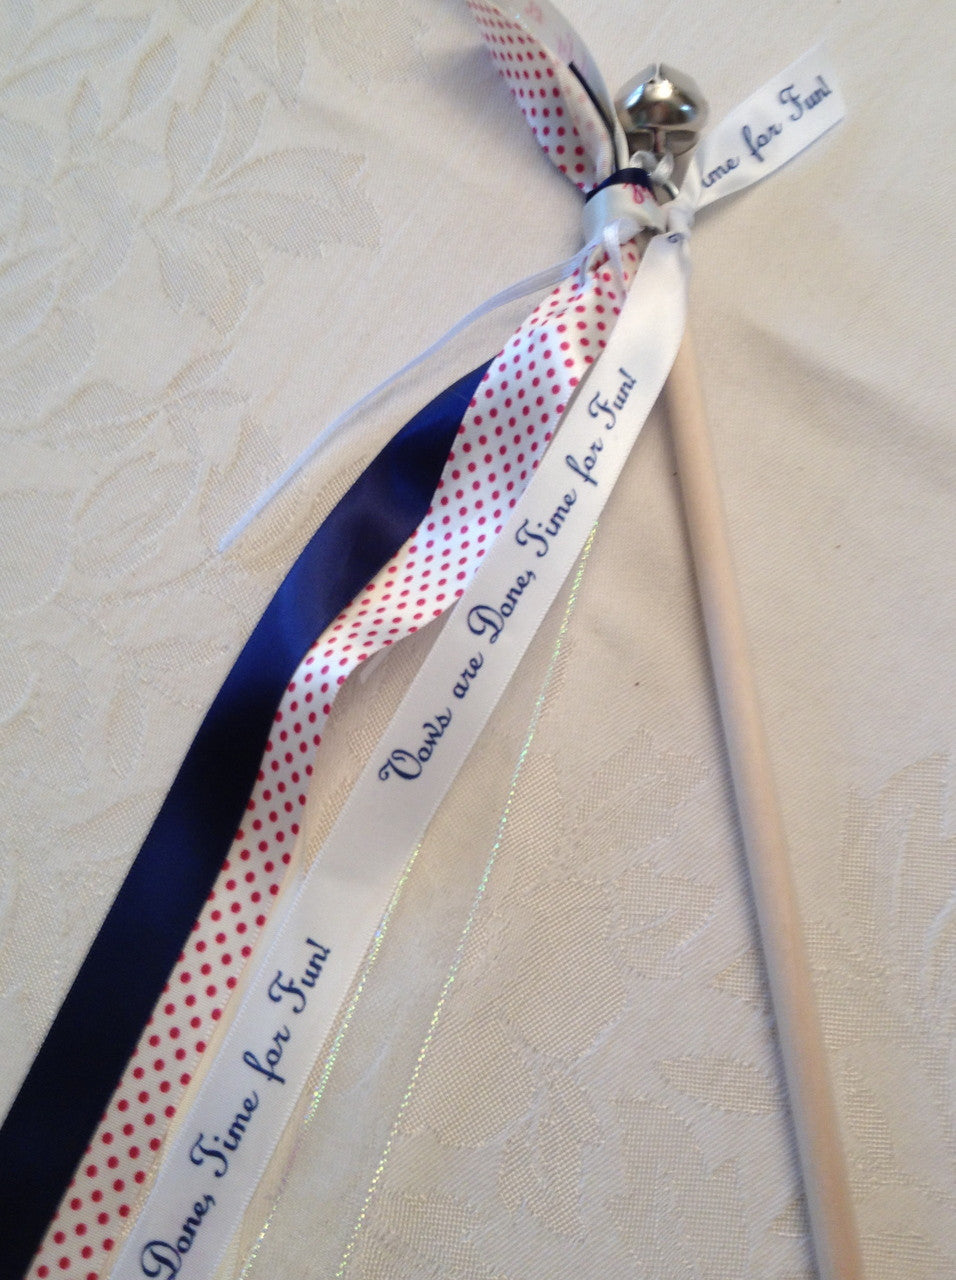 This wedding wand with our Vows are Done Time for Fun ribbon added makes such a fun prop for your reception party!